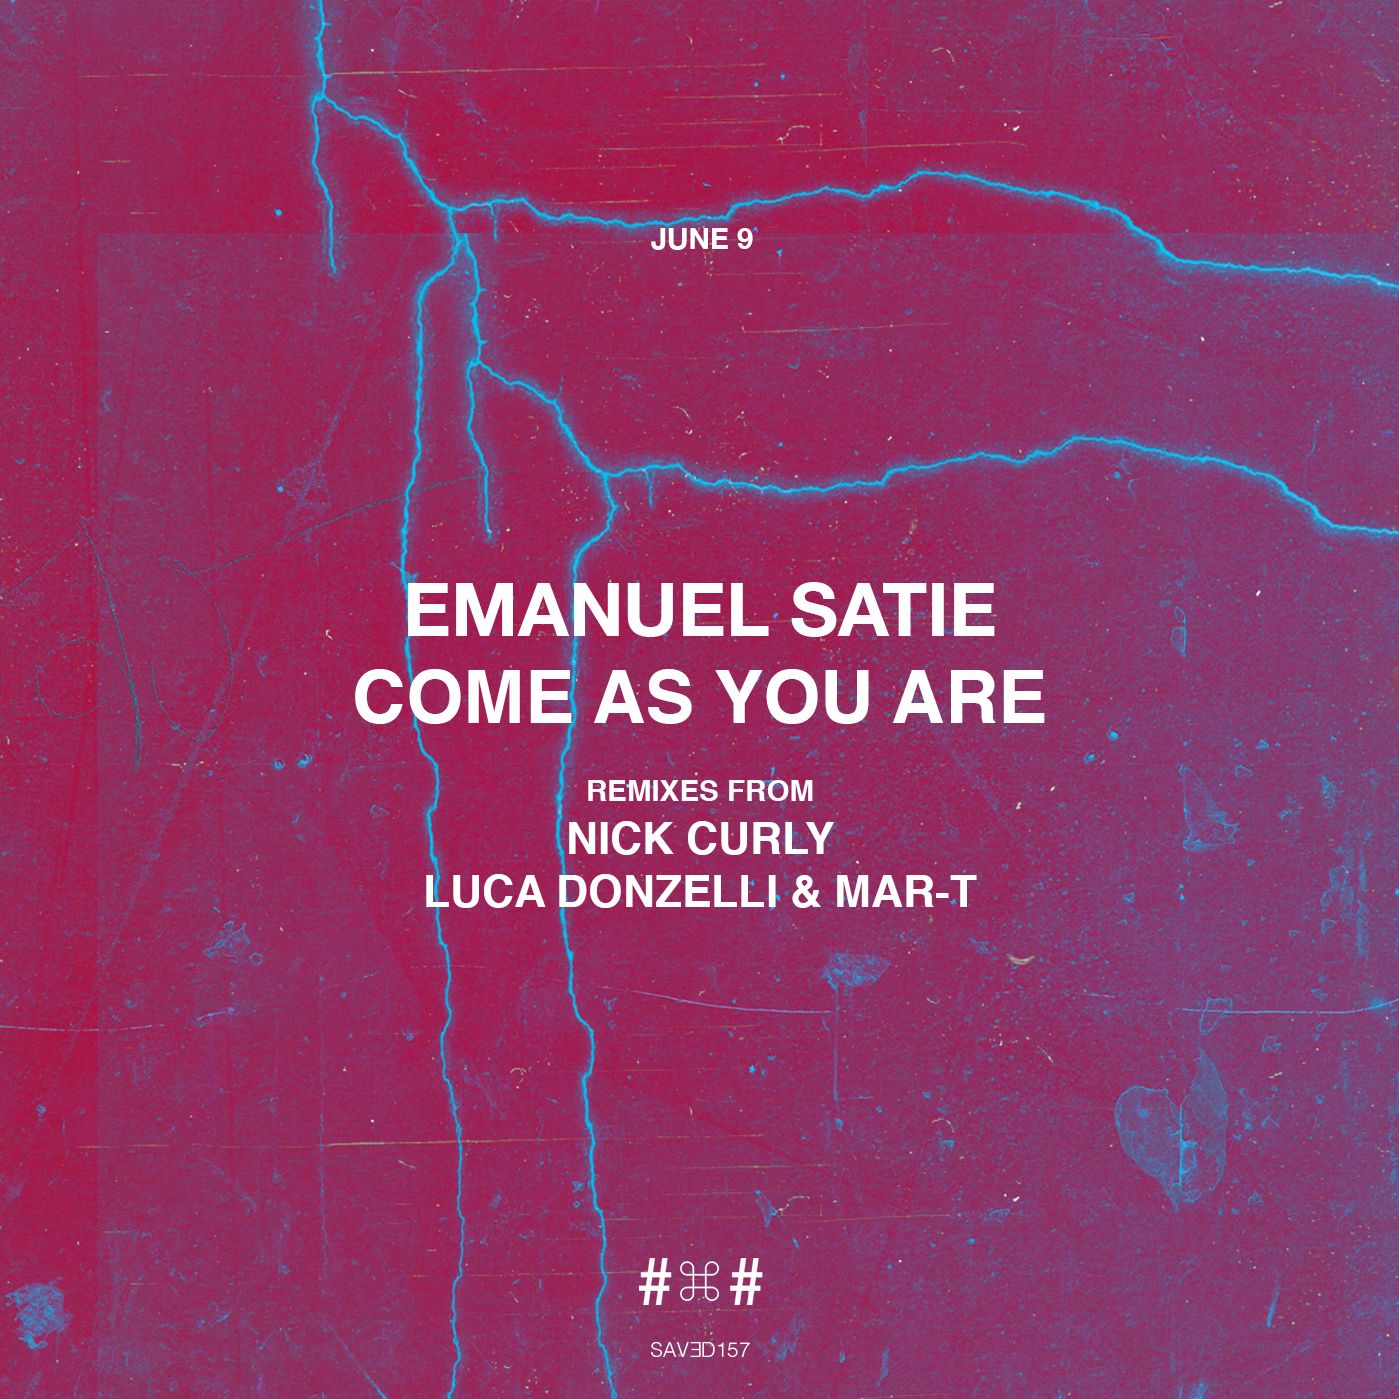 Ladda ner Emanuel Satie - Come As You Are (Nick Curly Remix)